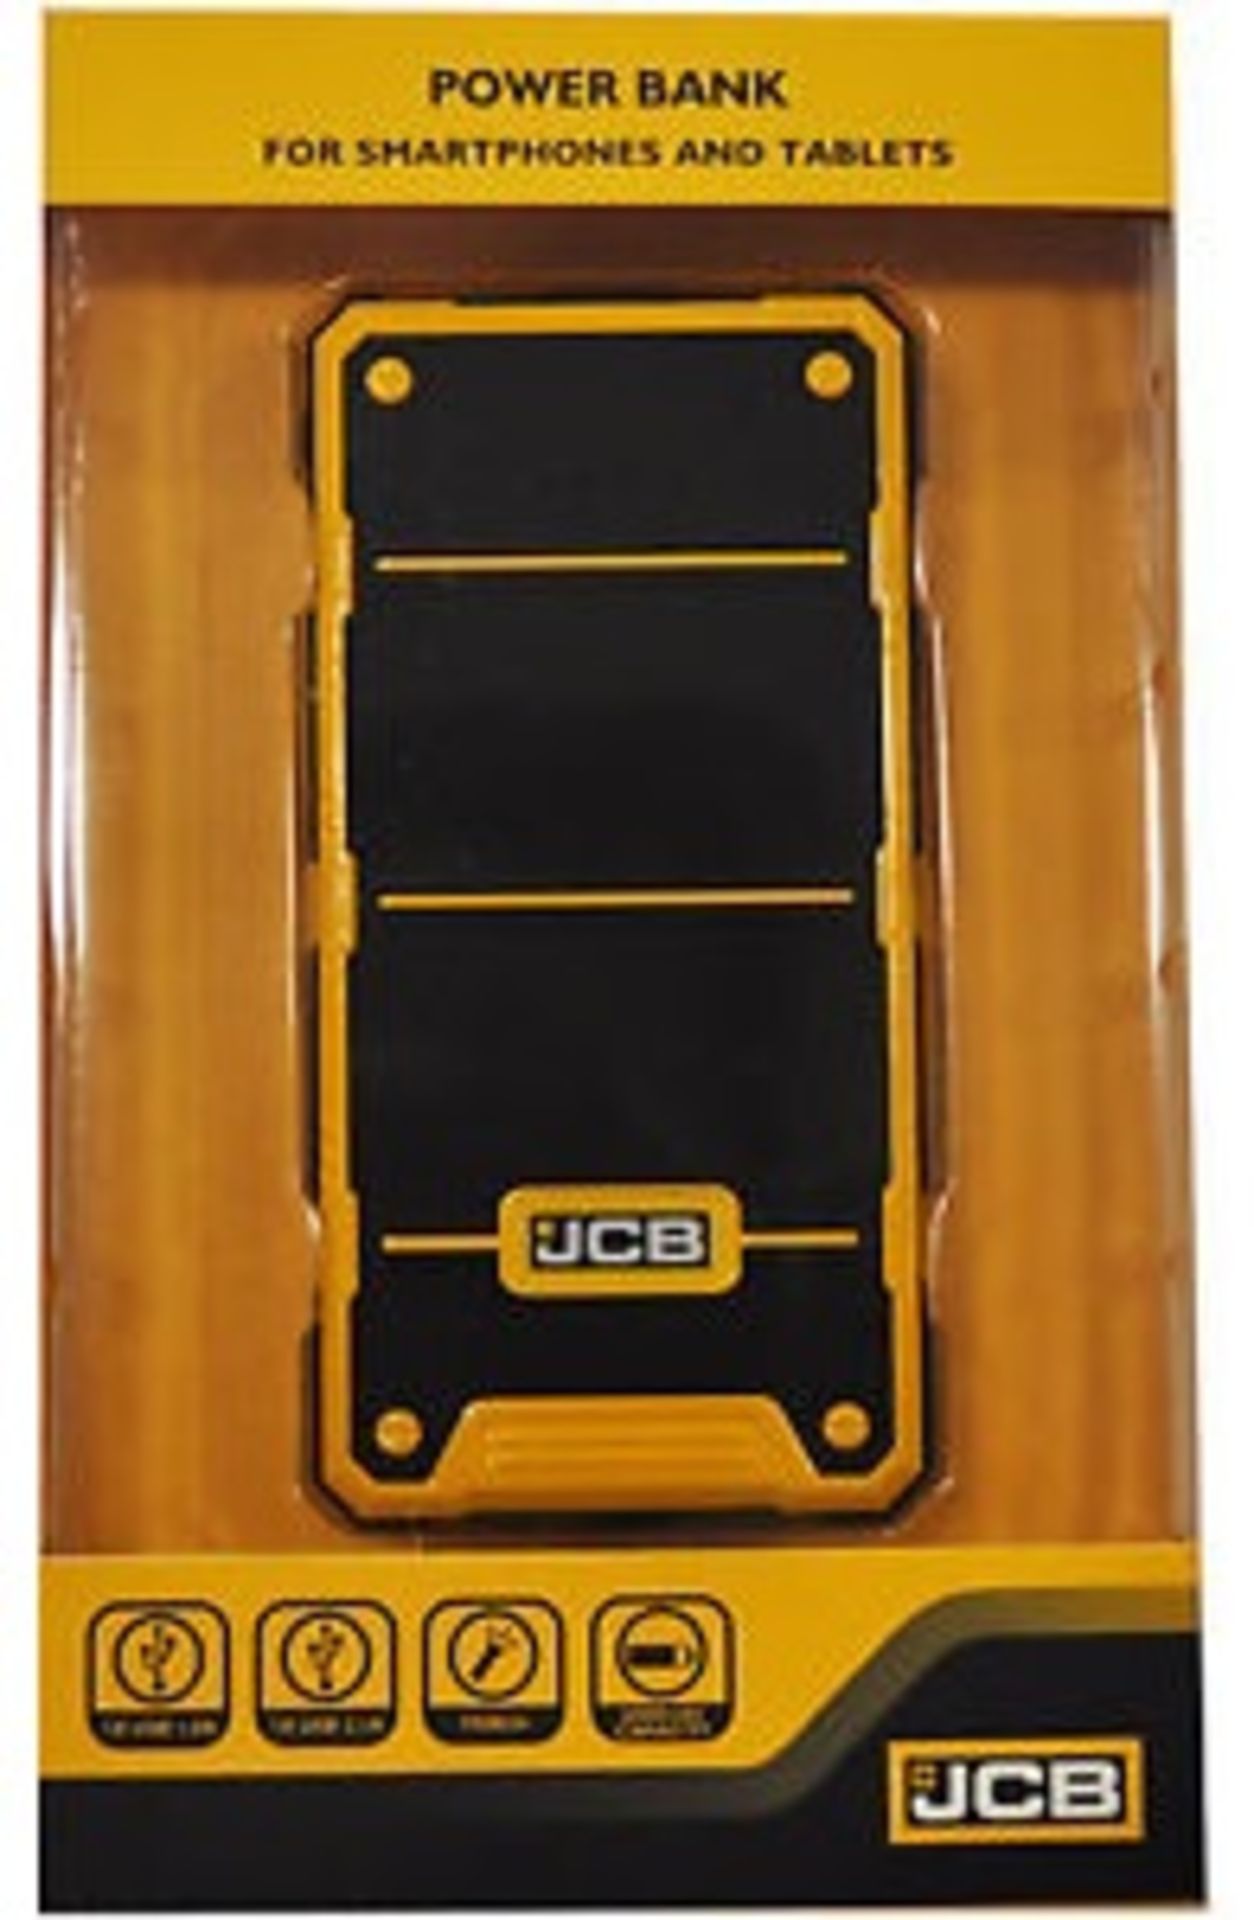 + VAT Brand New JCB 6000mAh Power Bank with 2 x USB Ports (1 x 1.0A and 1 x 2.1A) Overcharge